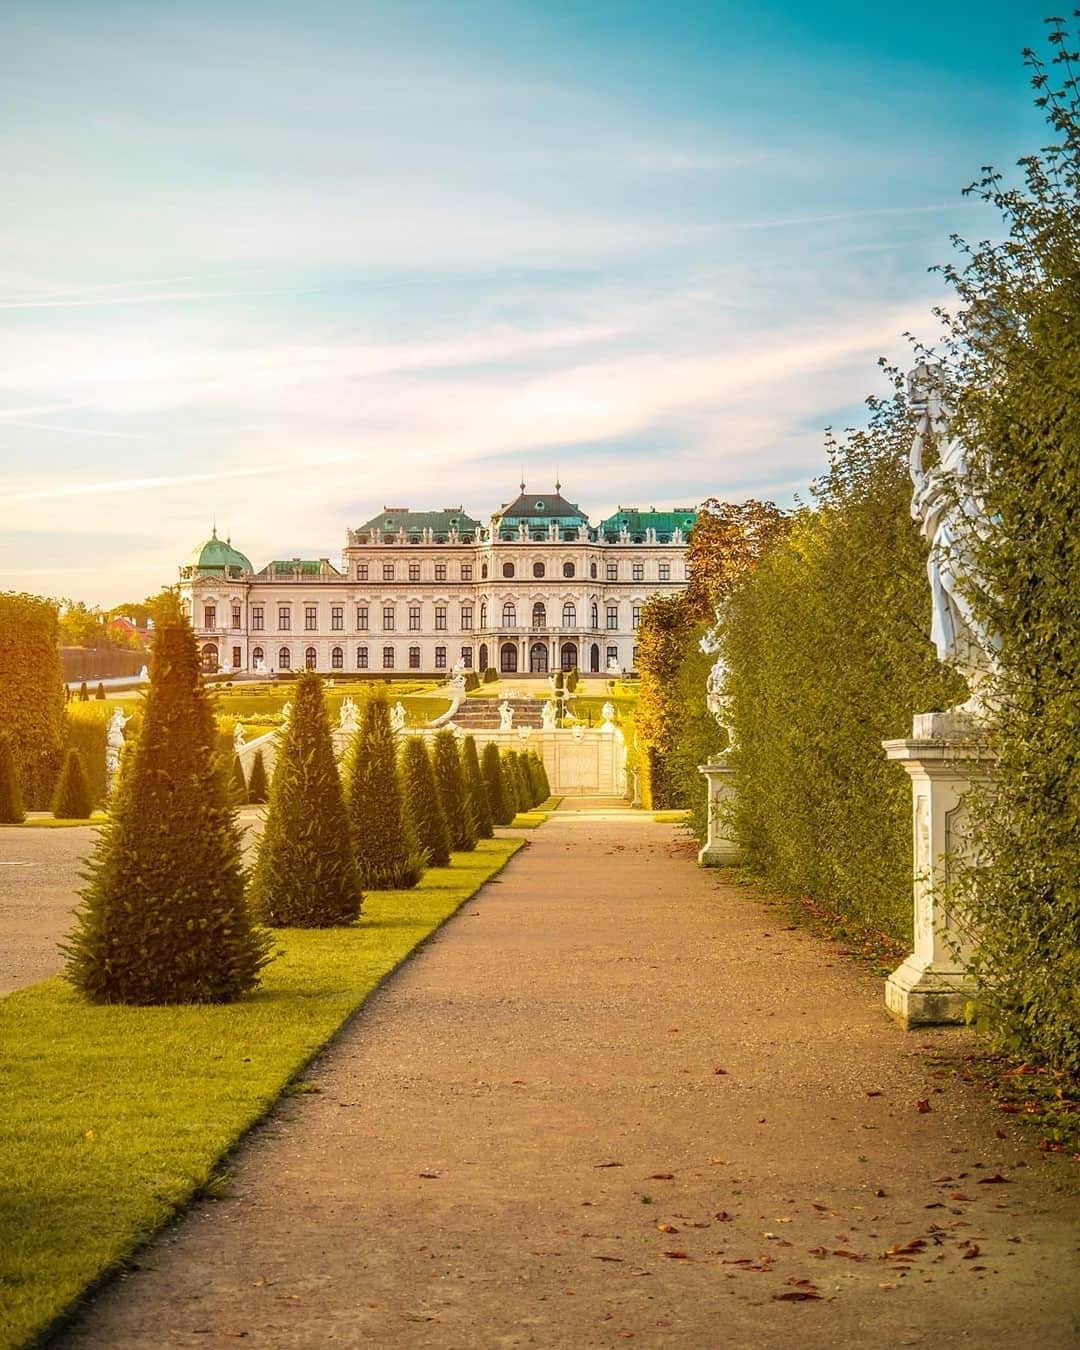 Wien | Viennaのインスタグラム：「Good morning and happy Weekend Vienna! ☀️Time to explore the majestic gardens of the @belvederemuseum. They are a highlight of Baroque landscape architecture. 🍃The large terraces with ponds connect the Upper to the Lower Belvedere. The Alpine Garden in the palace park is the oldest in Europe. 🪻 by @enzvnt #ViennaNow  #belvedere #belvederemuseum #vienna #wien #belvederepalace #vienna_austria #vienna_city #visitvienna #viennagram #wienliebe #garden #palace #travelgram #traveleurope #traveltheworld #travelblogger」